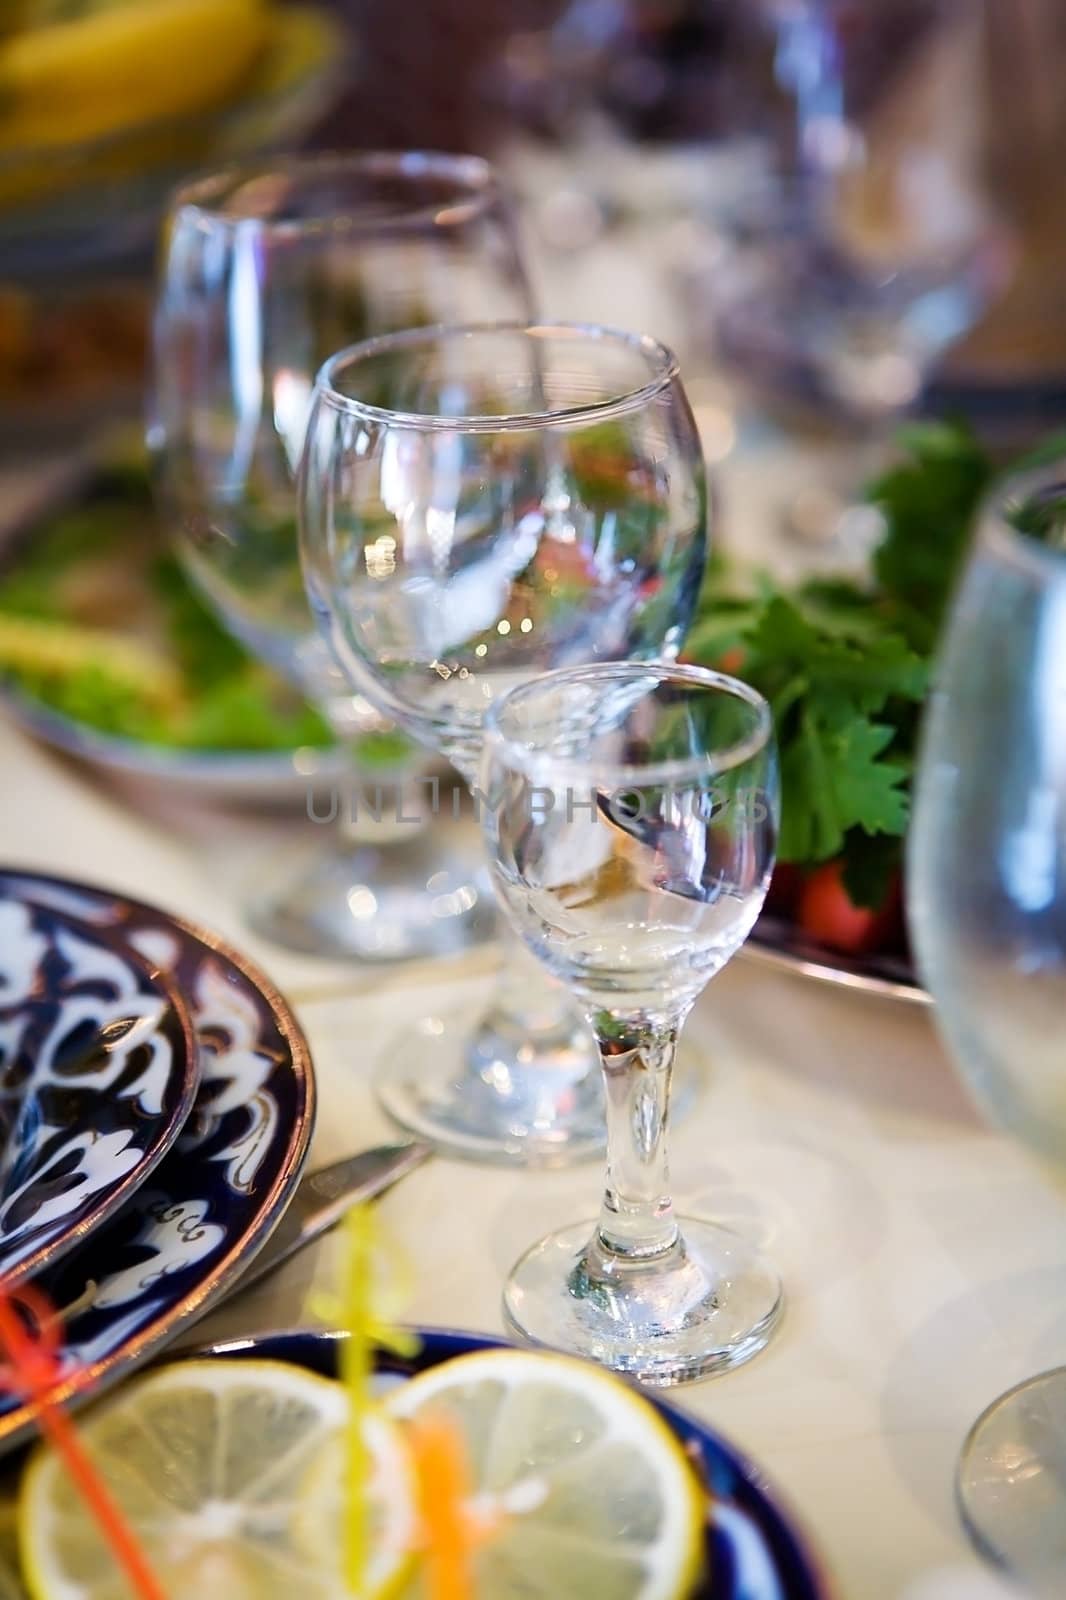 Empty Glasses on restaurant table before party begins